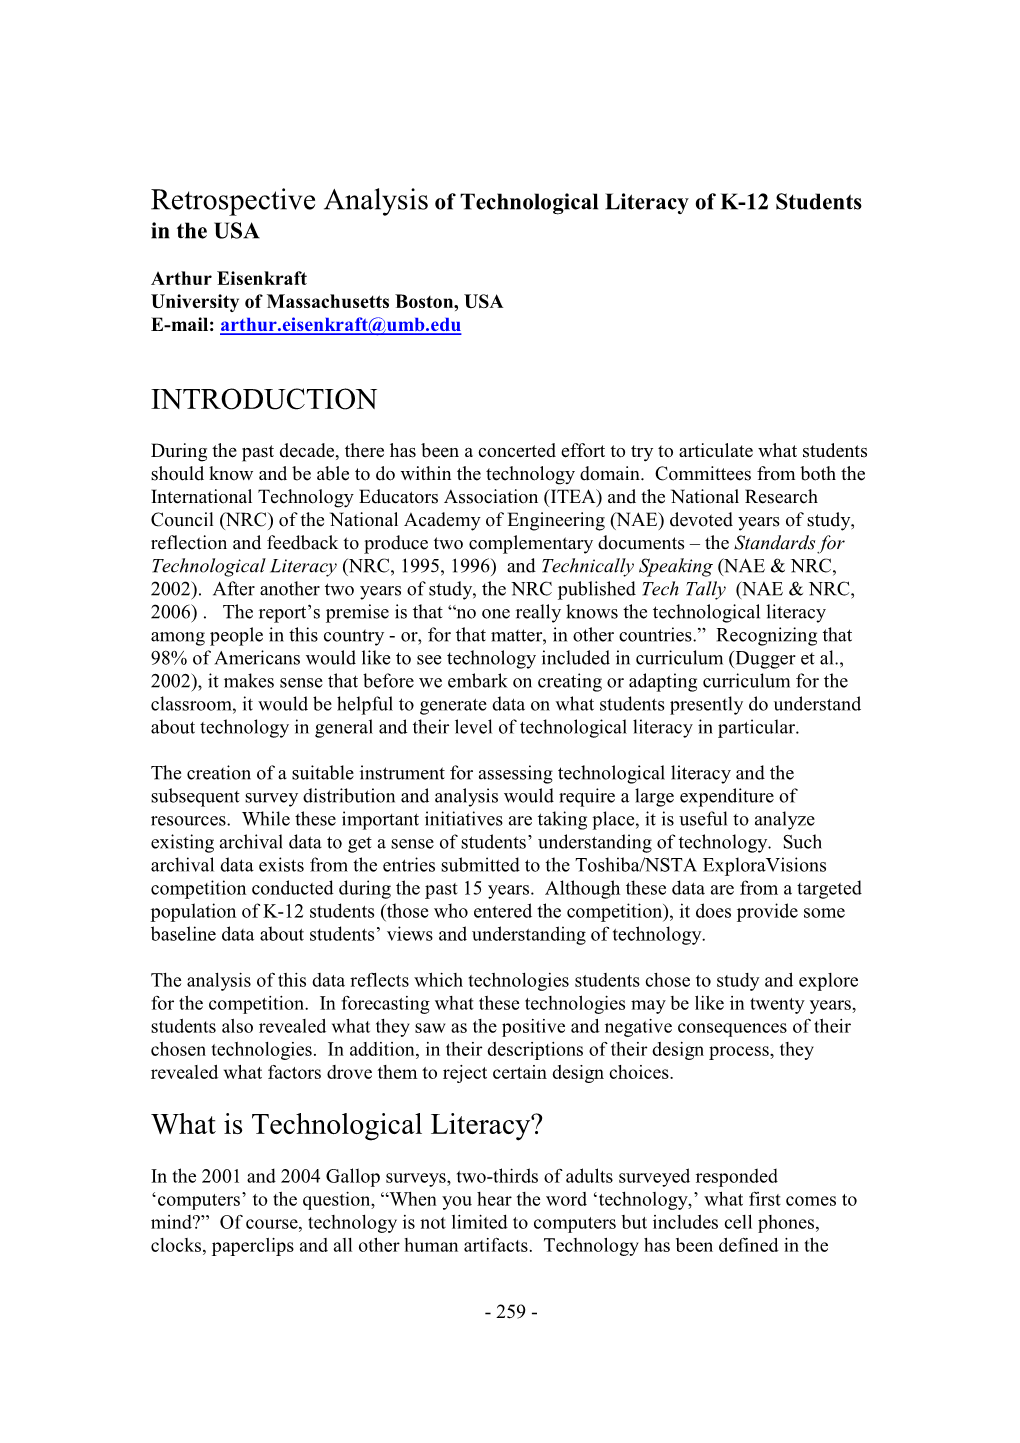 INTRODUCTION What Is Technological Literacy?